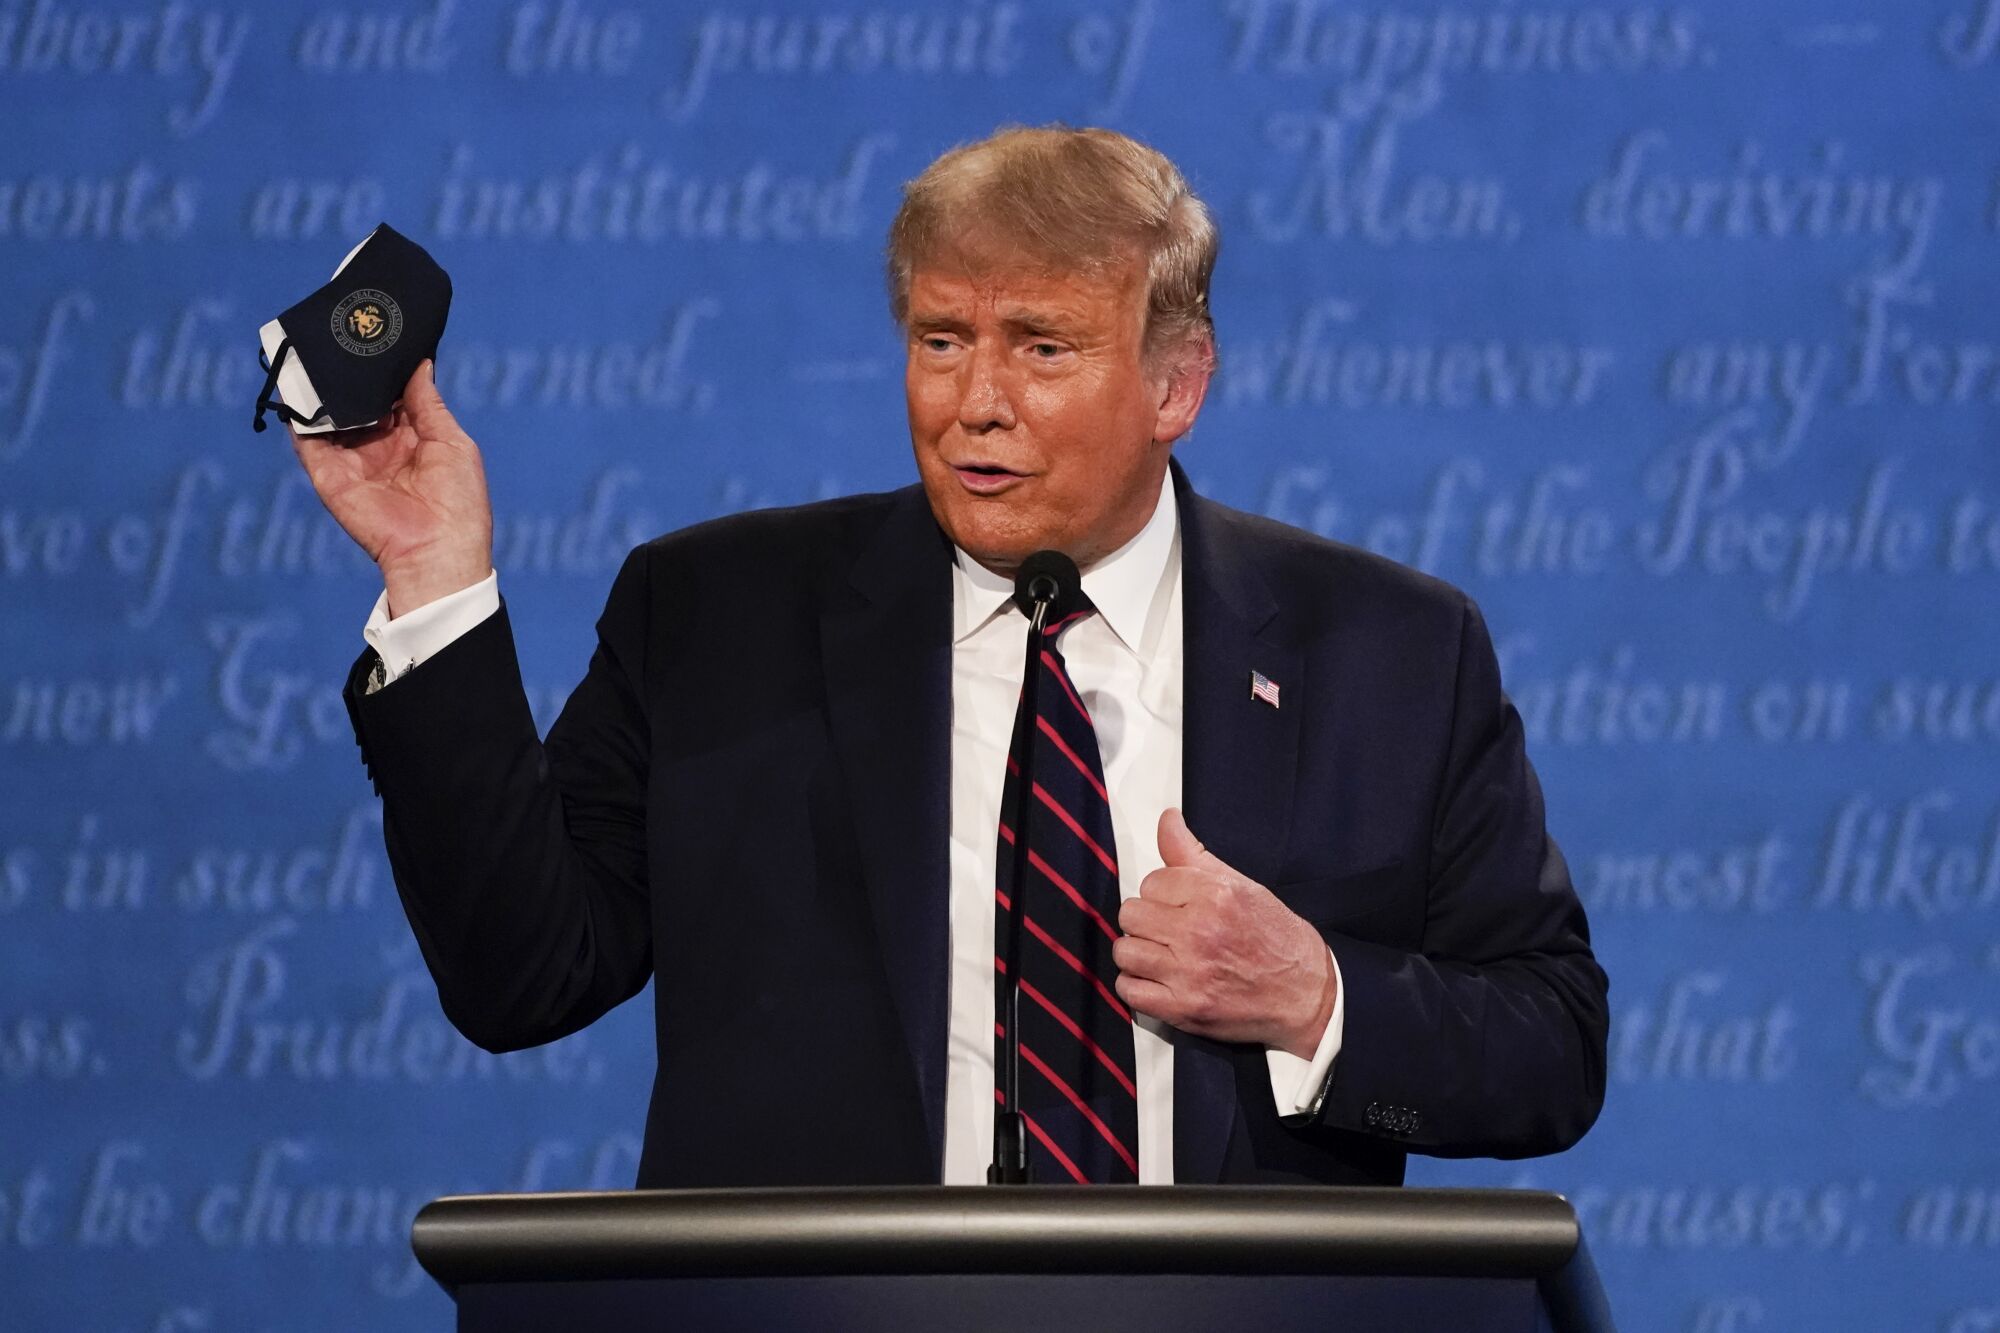 President Trump holds up his face mask during Tuesday's debate in Cleveland